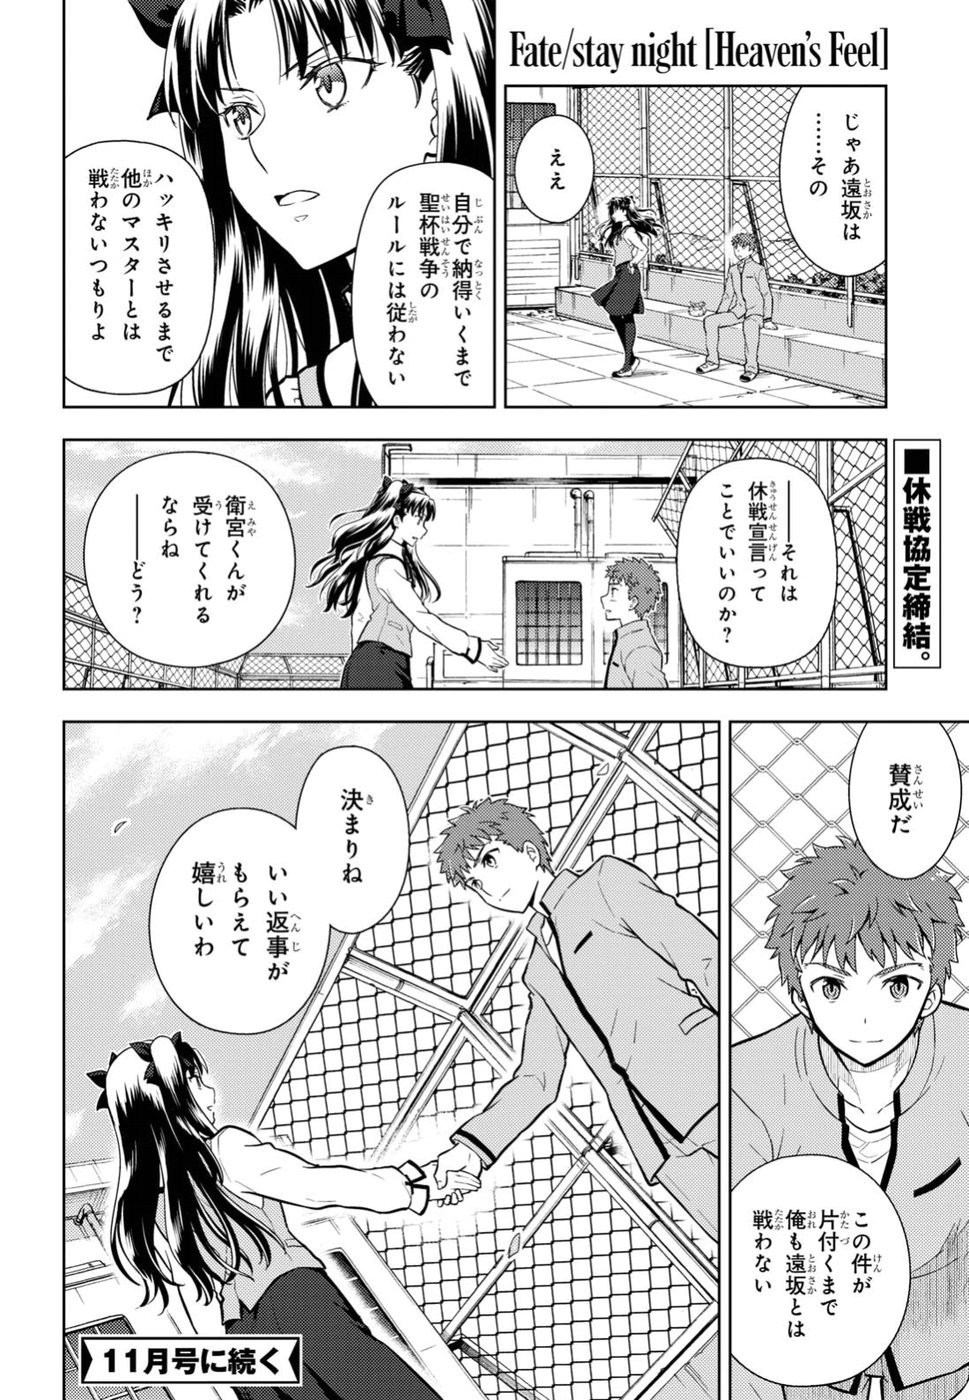 Fate/Stay night Heaven's Feel - Chapter 41 - Page 35